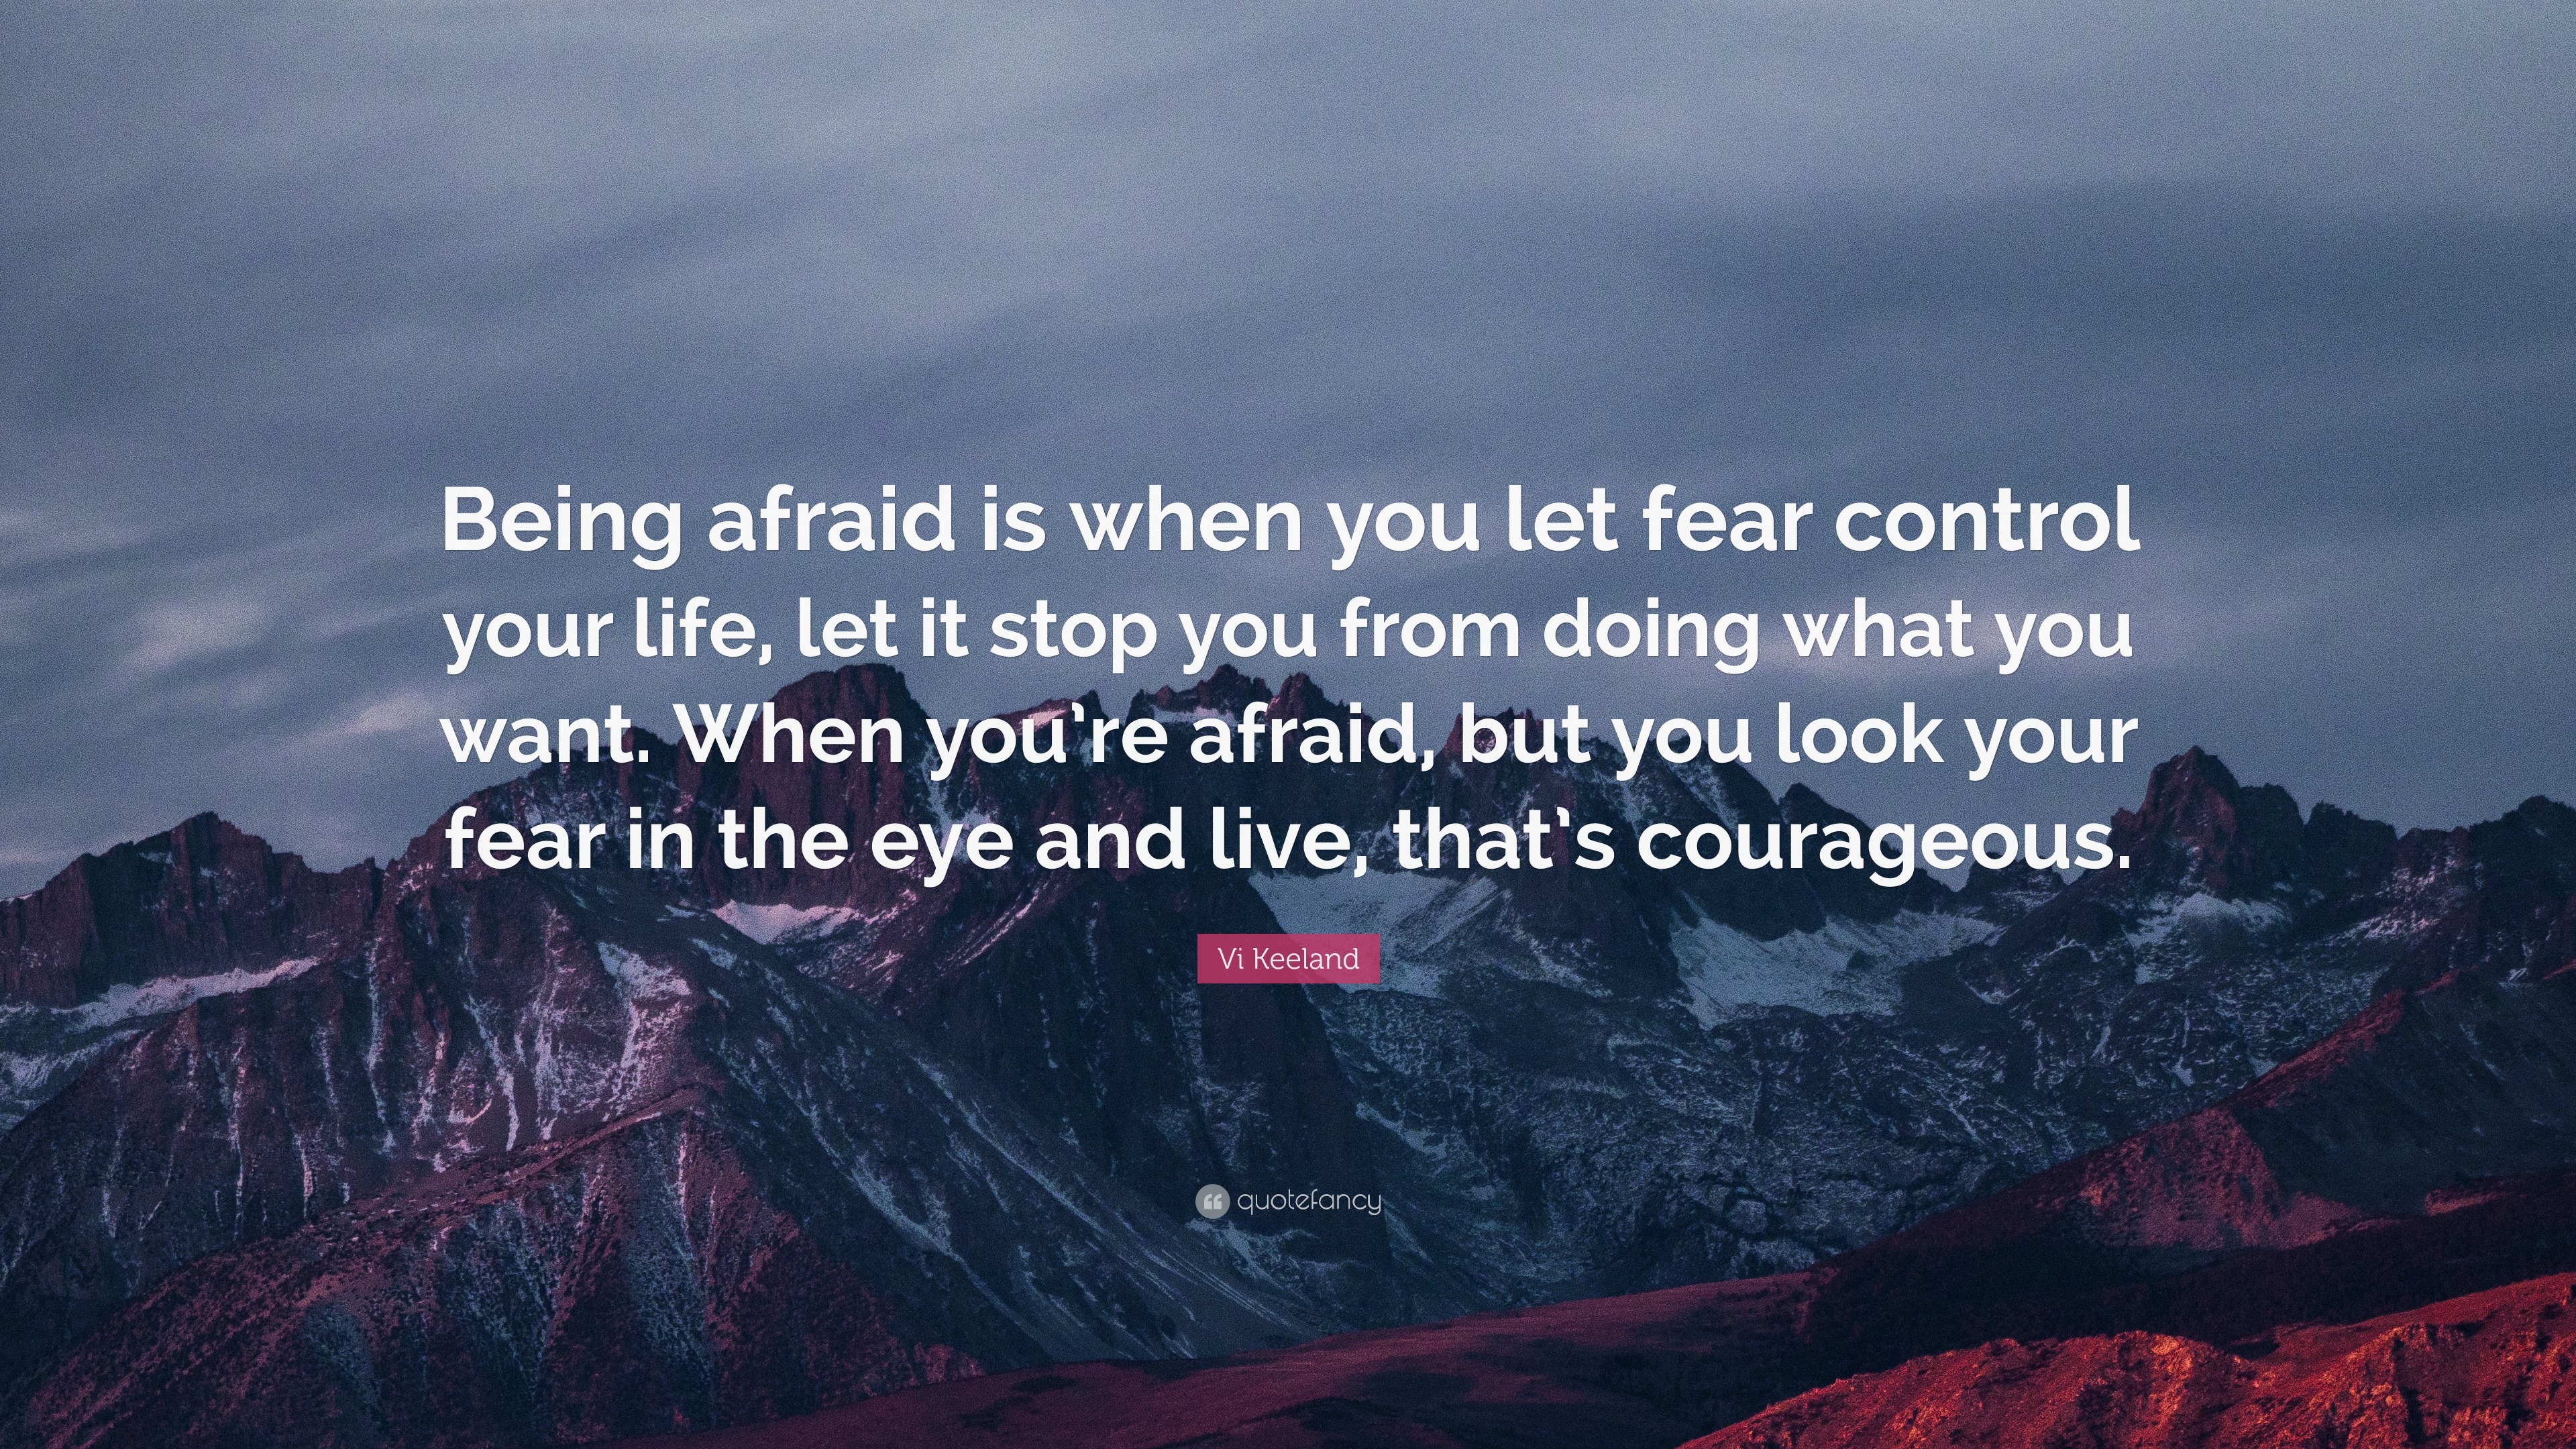 Vi Keeland Quote: “Being afraid is when you let fear control your life ...